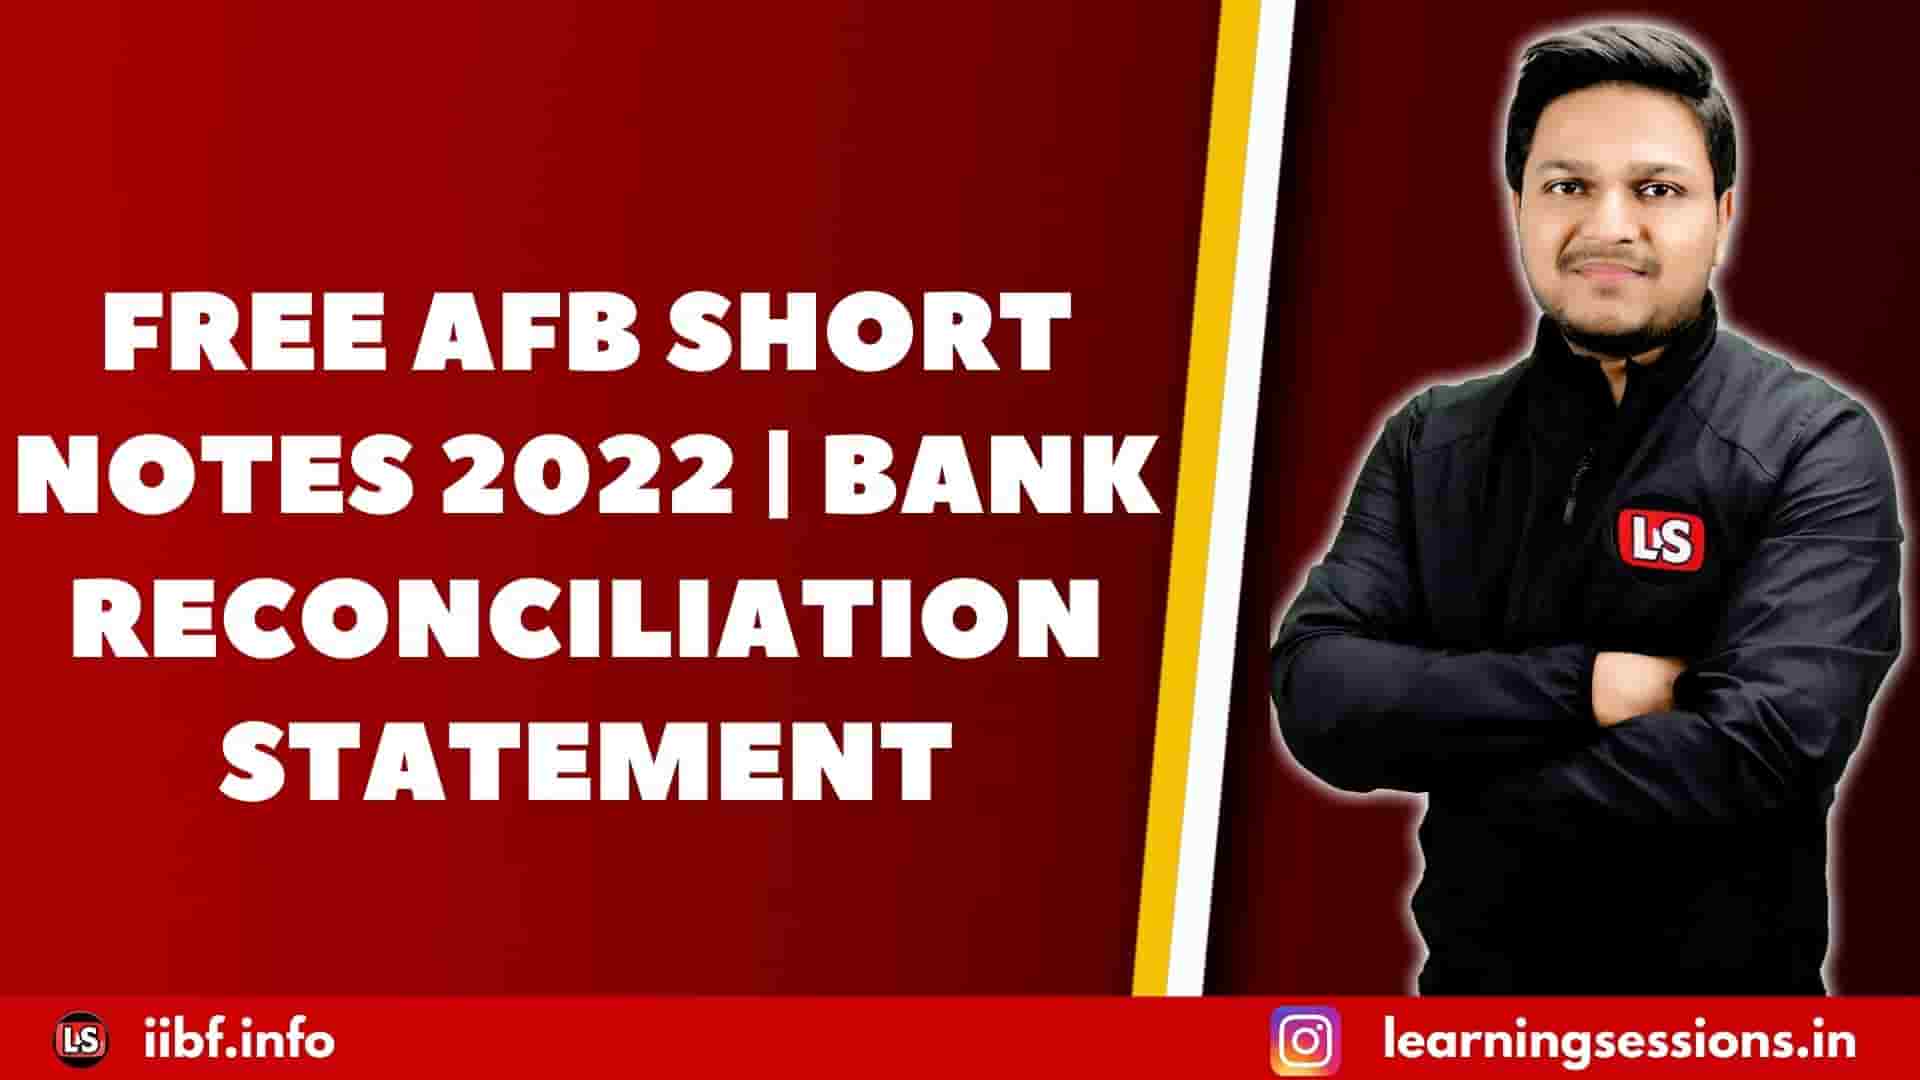 FREE AFB SHORT NOTES 2022 | BANK RECONCILIATION STATEMENT